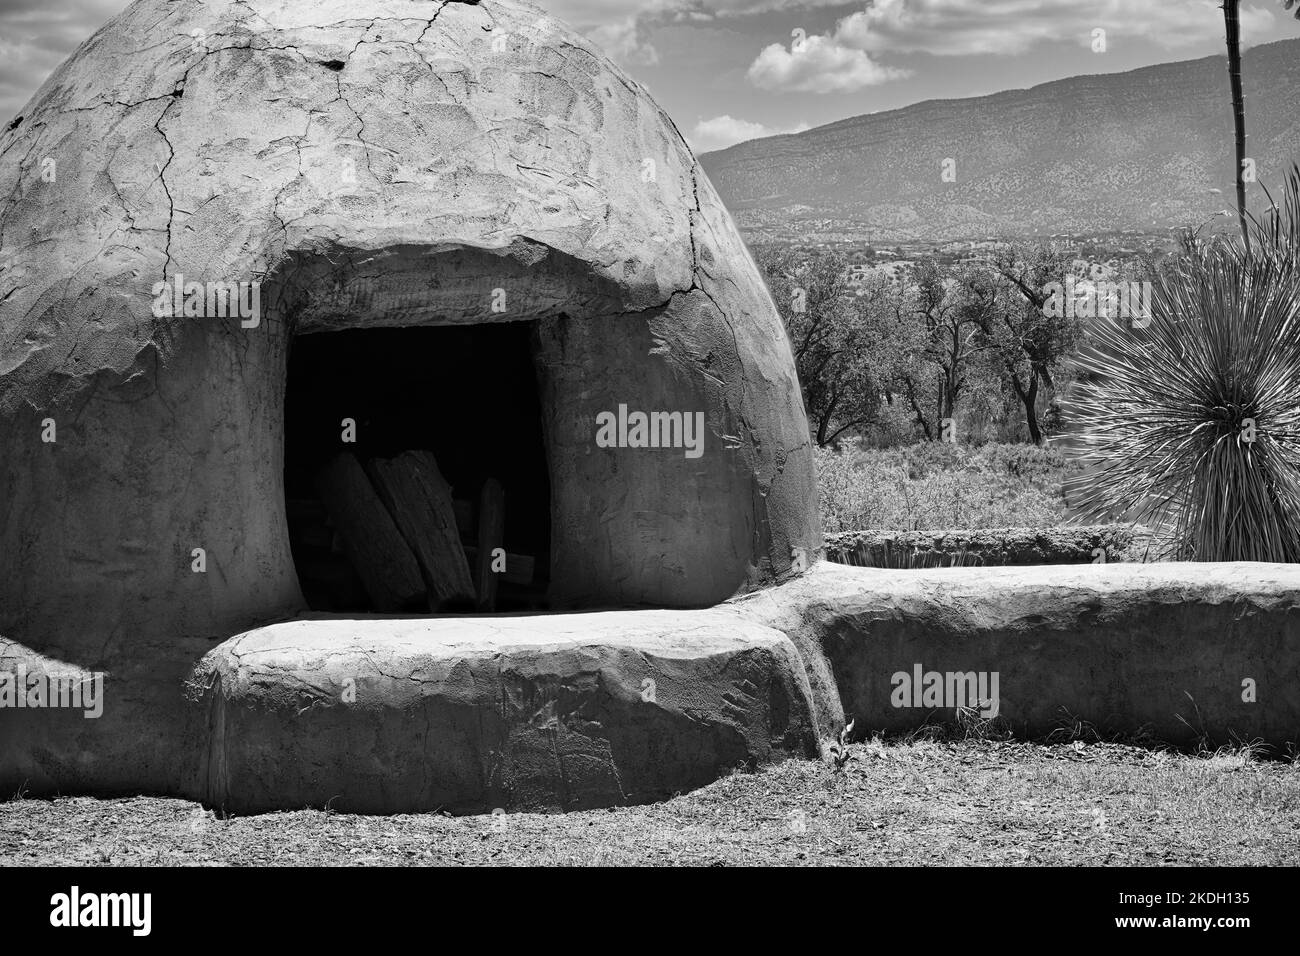 Traditional Horno or Bread Oven in Black and White from the Southwestern Desert of the United States Stock Photo